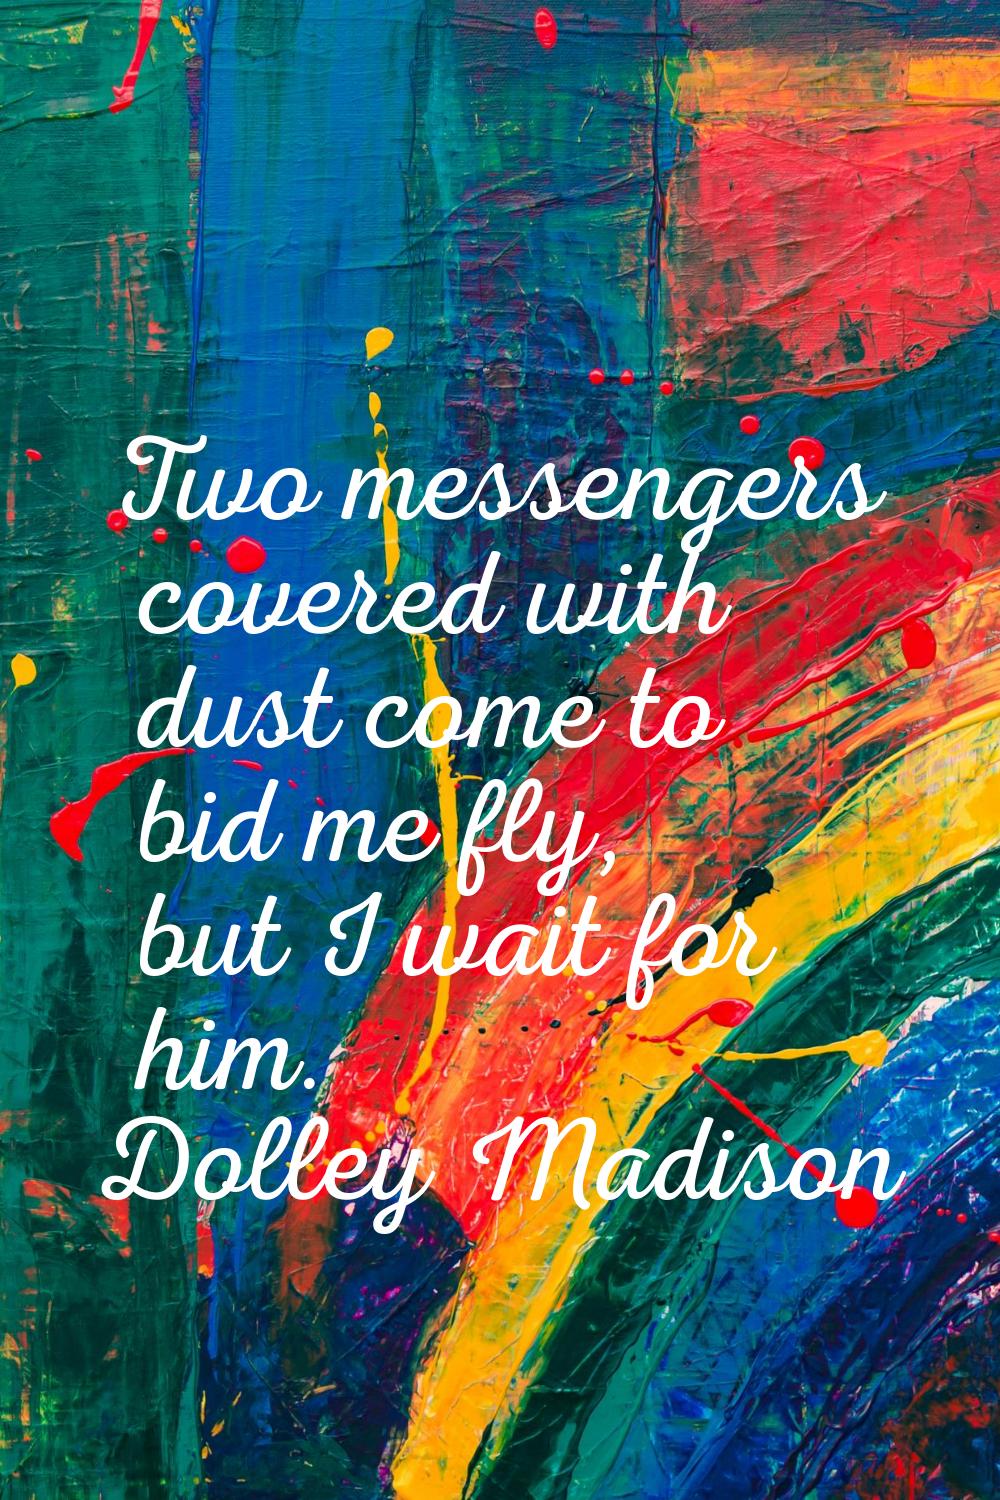 Two messengers covered with dust come to bid me fly, but I wait for him.